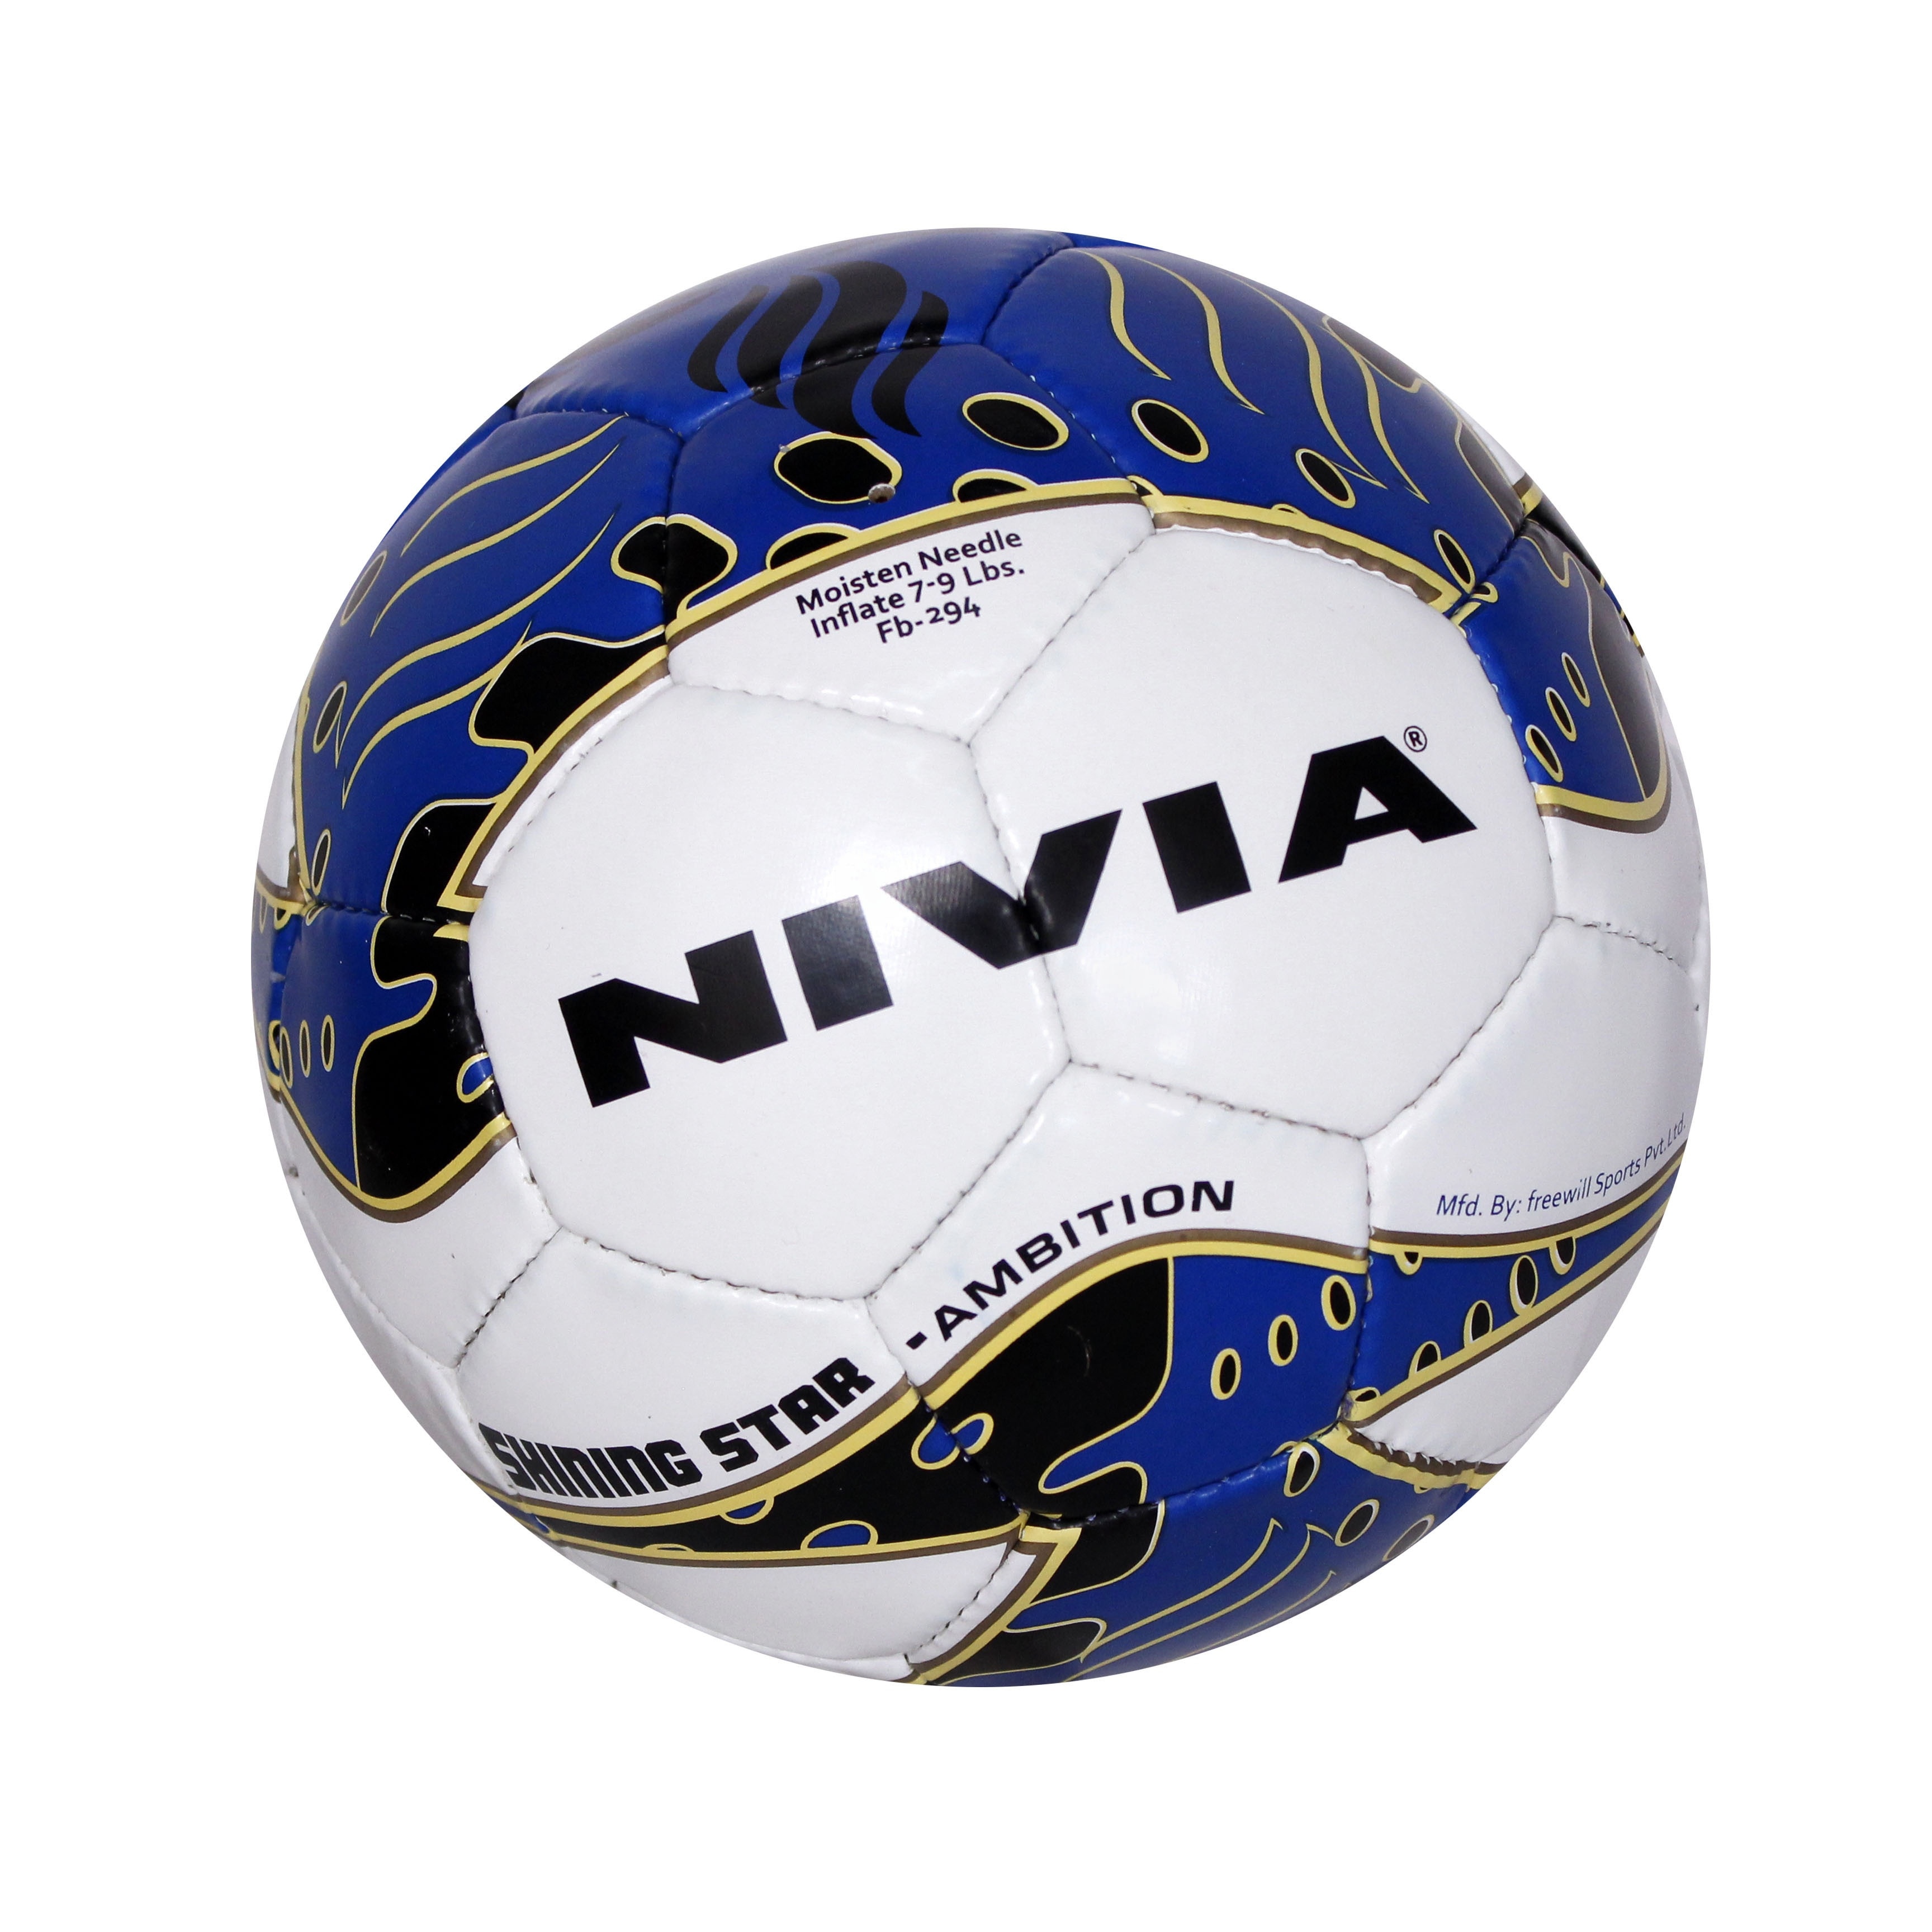 1920x1080 wallpaper | white blue and black nivia volleyball | Peakpx